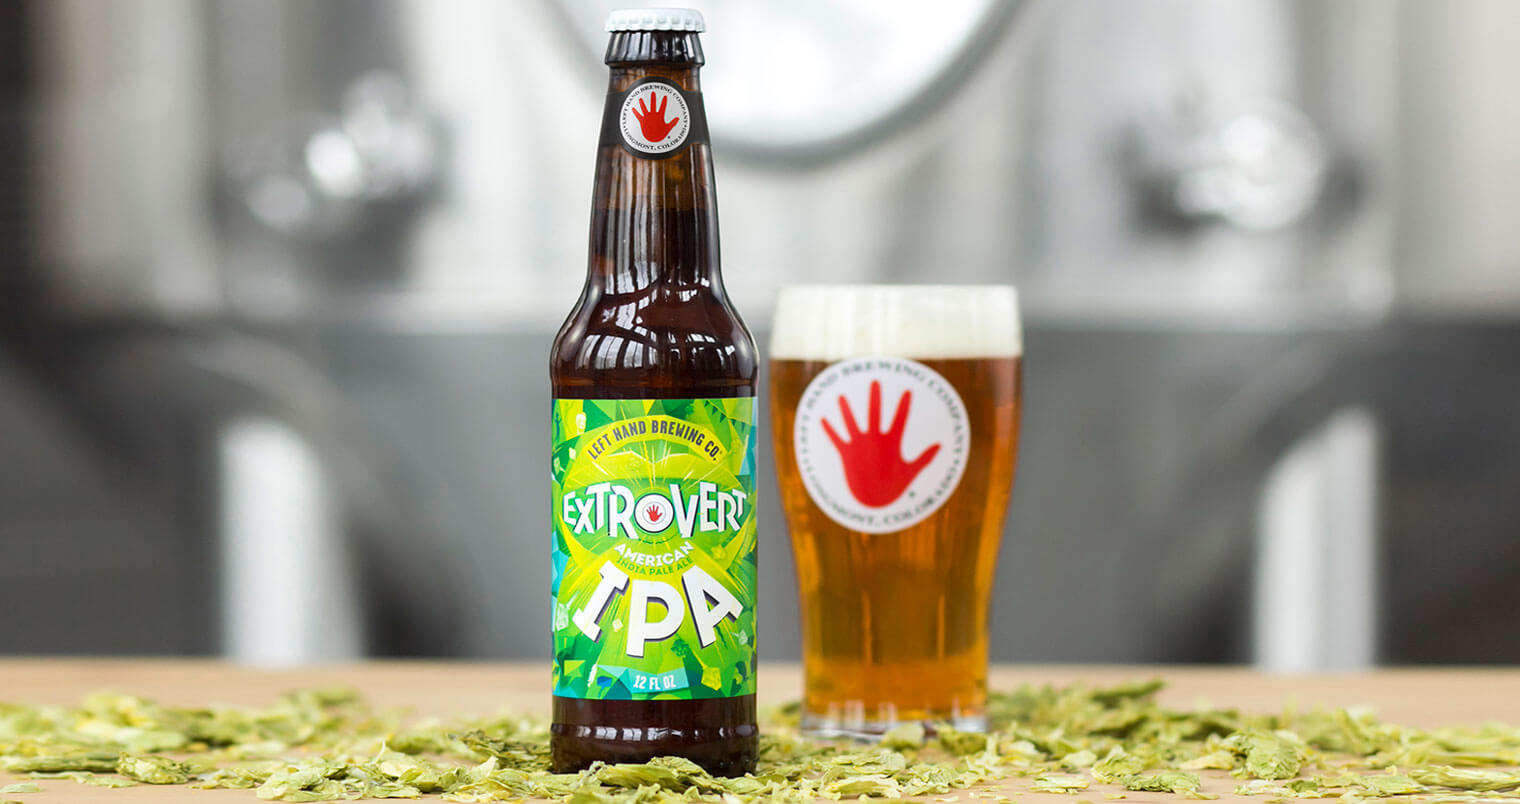 Left Hand Brewing Co. Releases Extrovert IPA, beer news, featured image